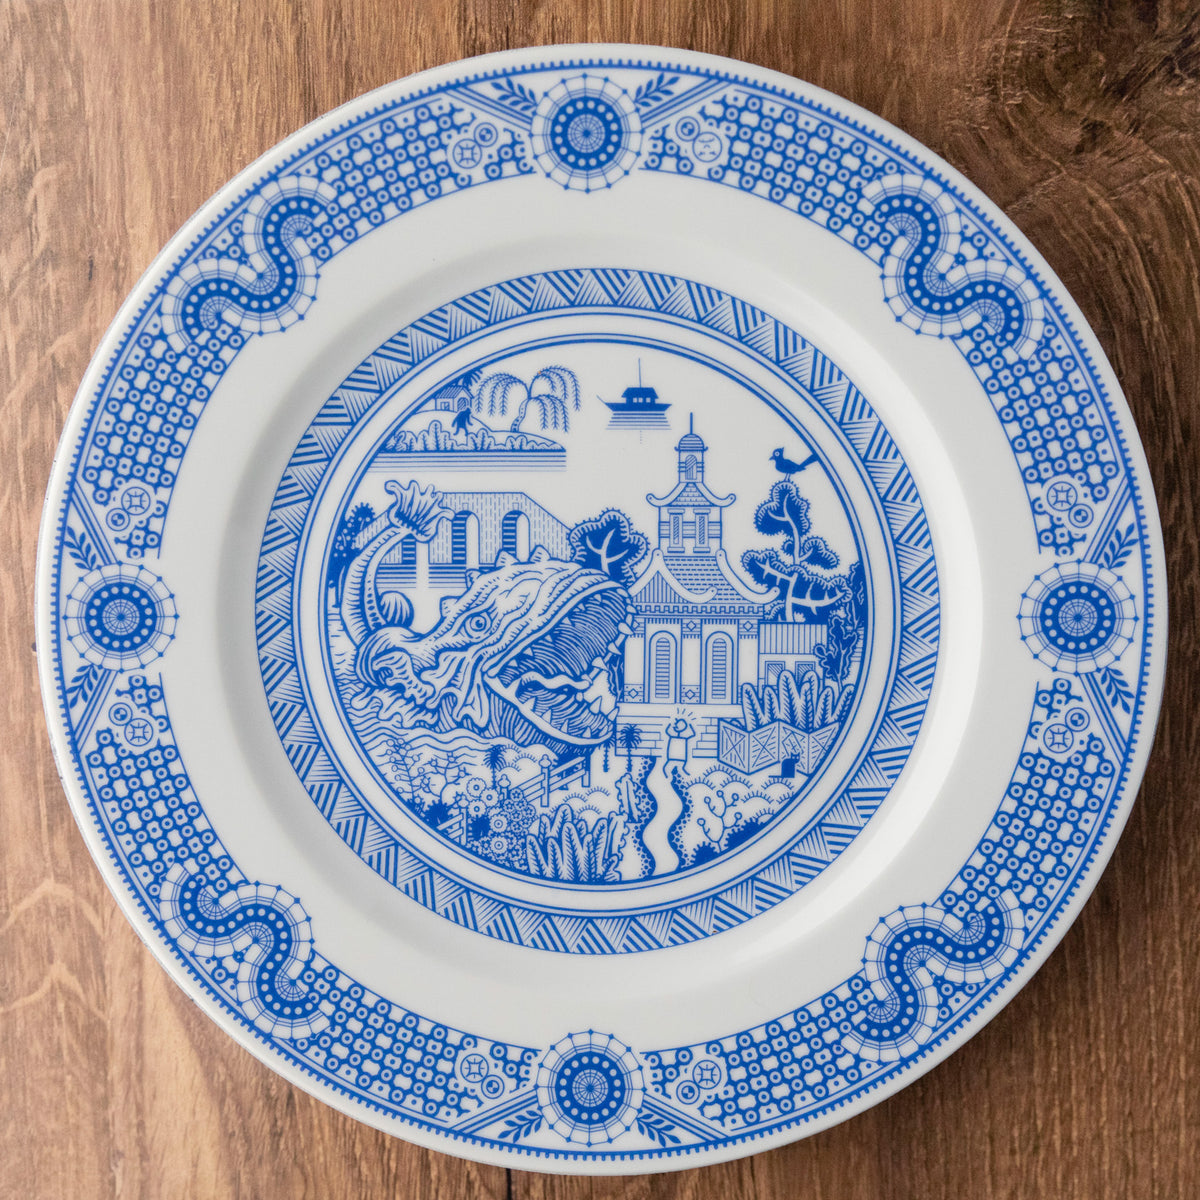 Four-Plate Set: Dinner Plates 1, 2, 3, and 4